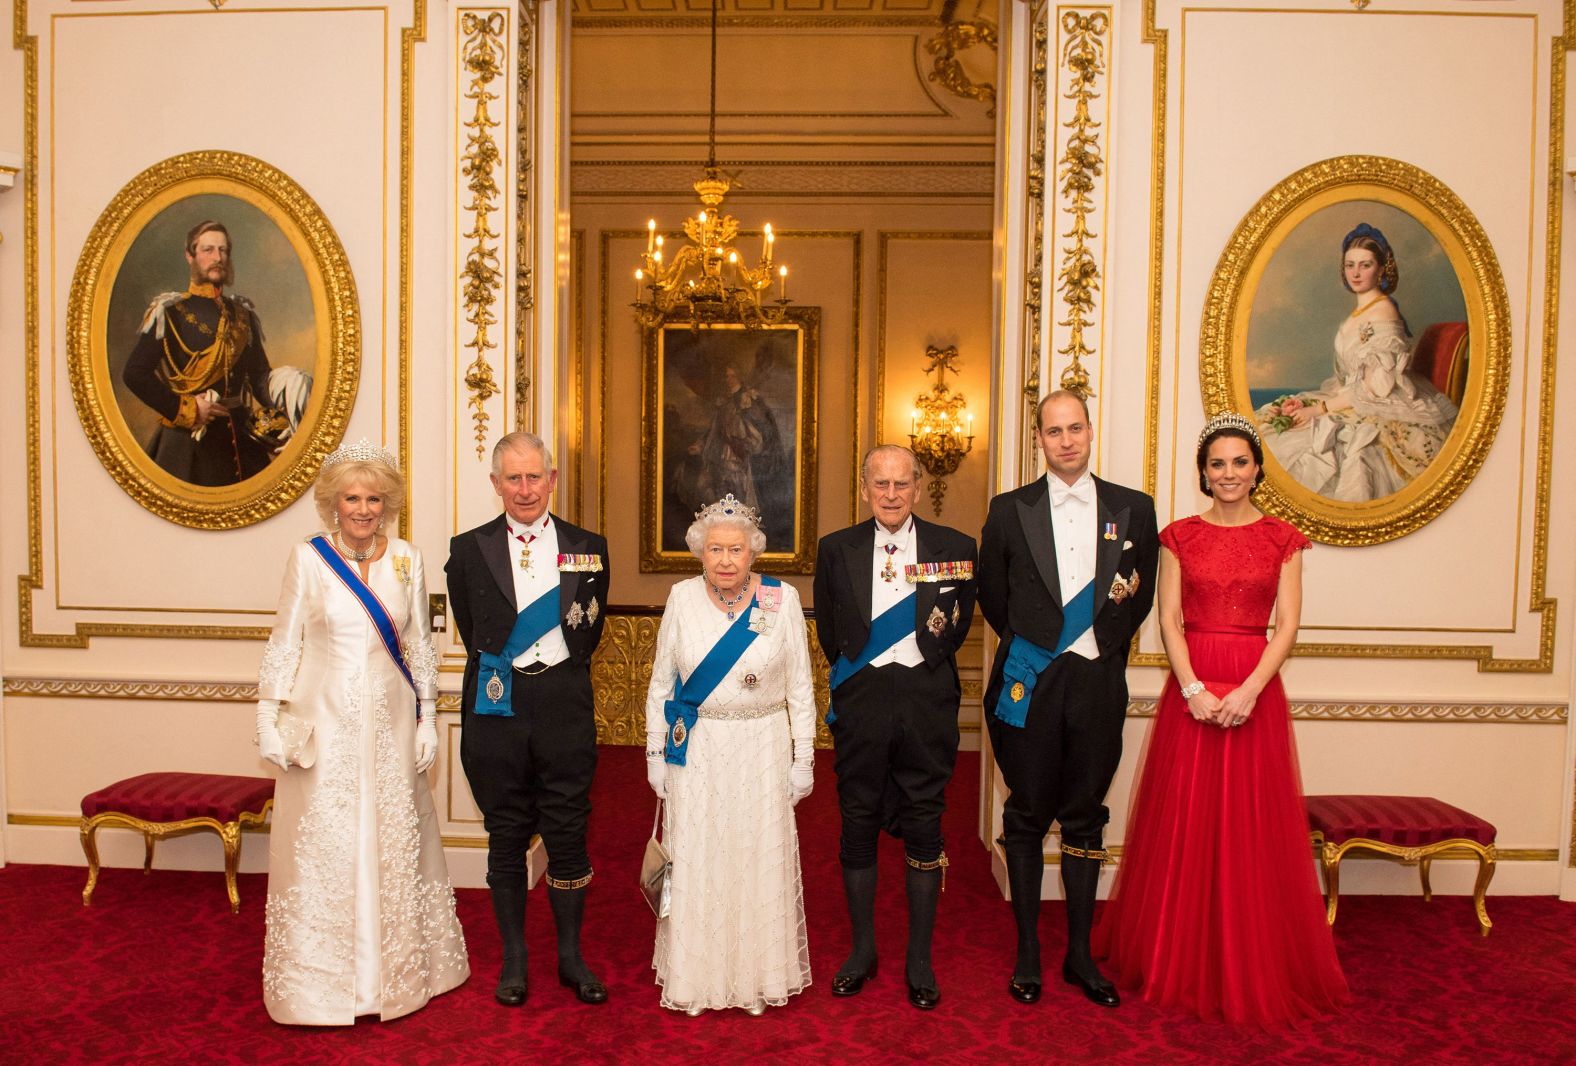 Queen Elizabeth II stands with her husband, Prince Philip; her son, Prince Charles, and his wife, Camilla; and her grandson Prince William, and his wife, Kate, as they pose photo a photograph ahead of an evening reception at Buckingham Palace in 2016.